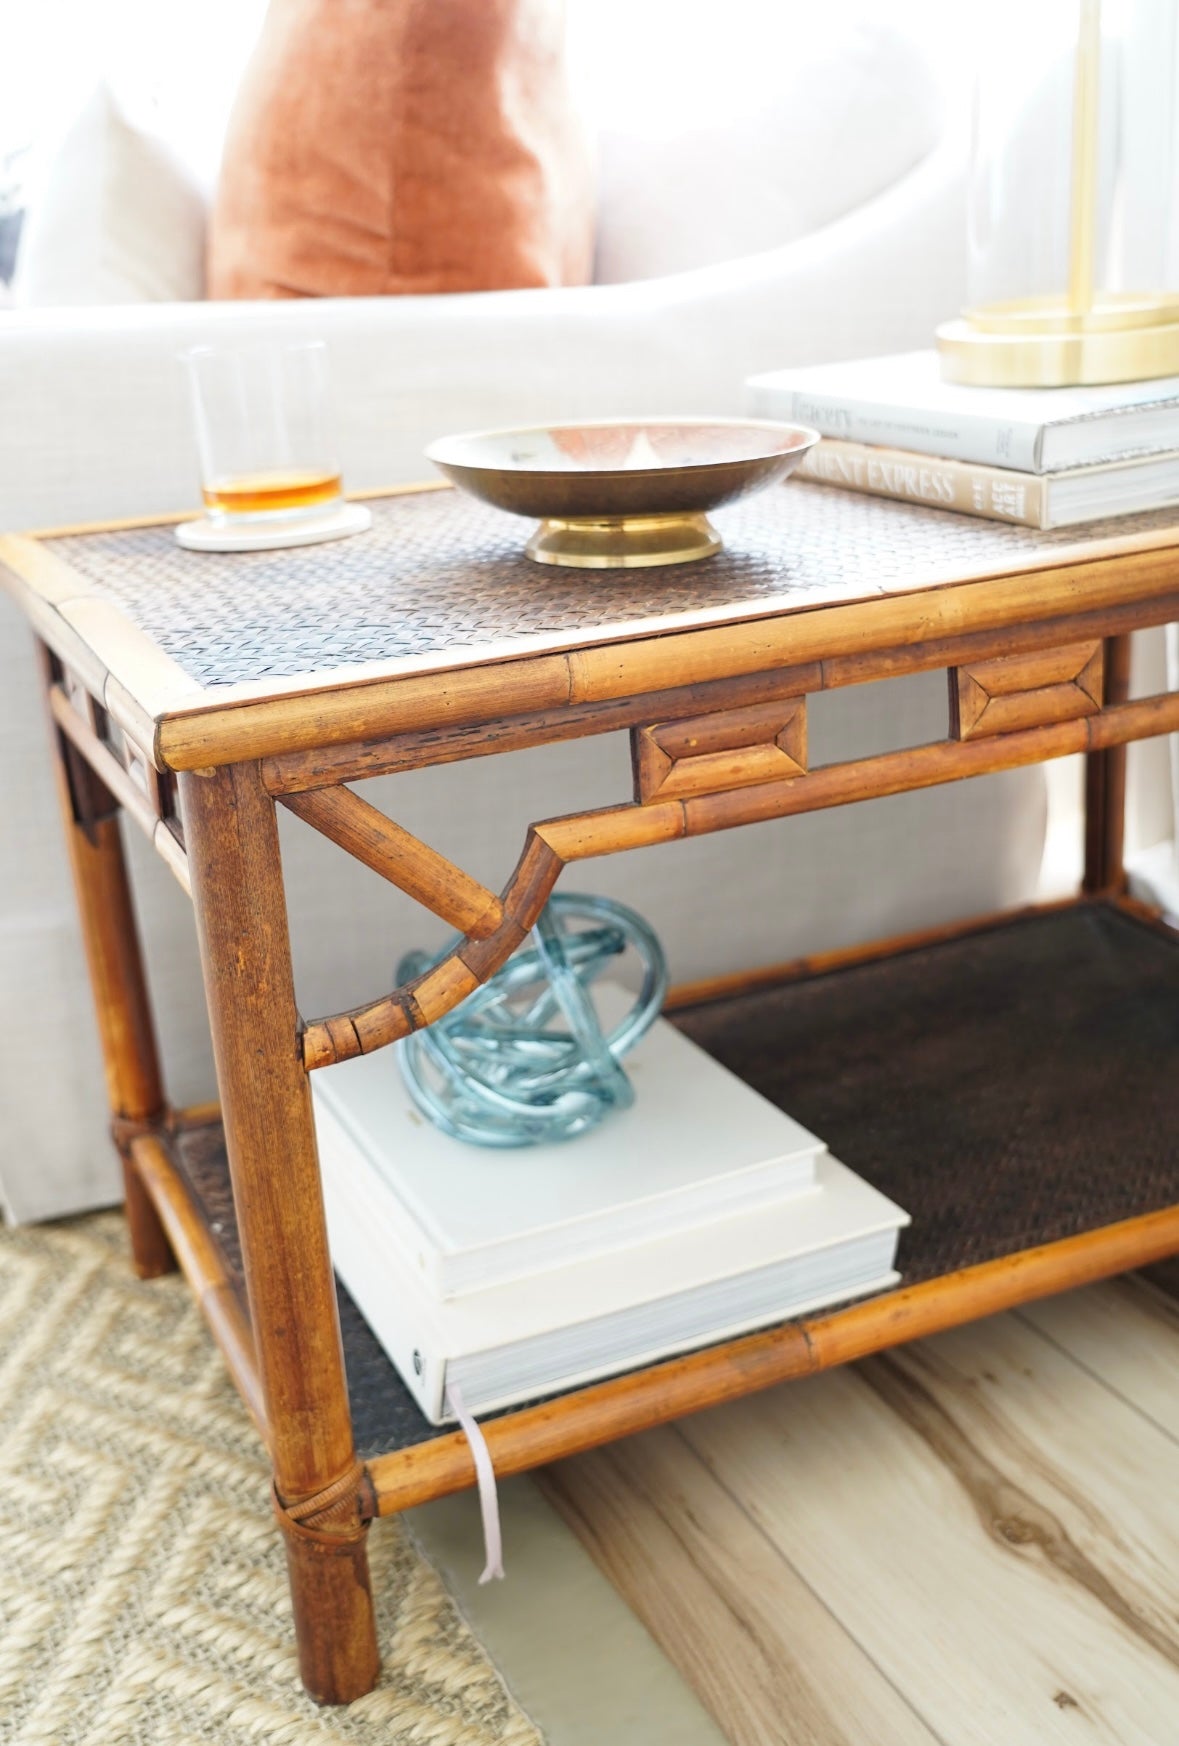 SIDE BAMBOO TABLE